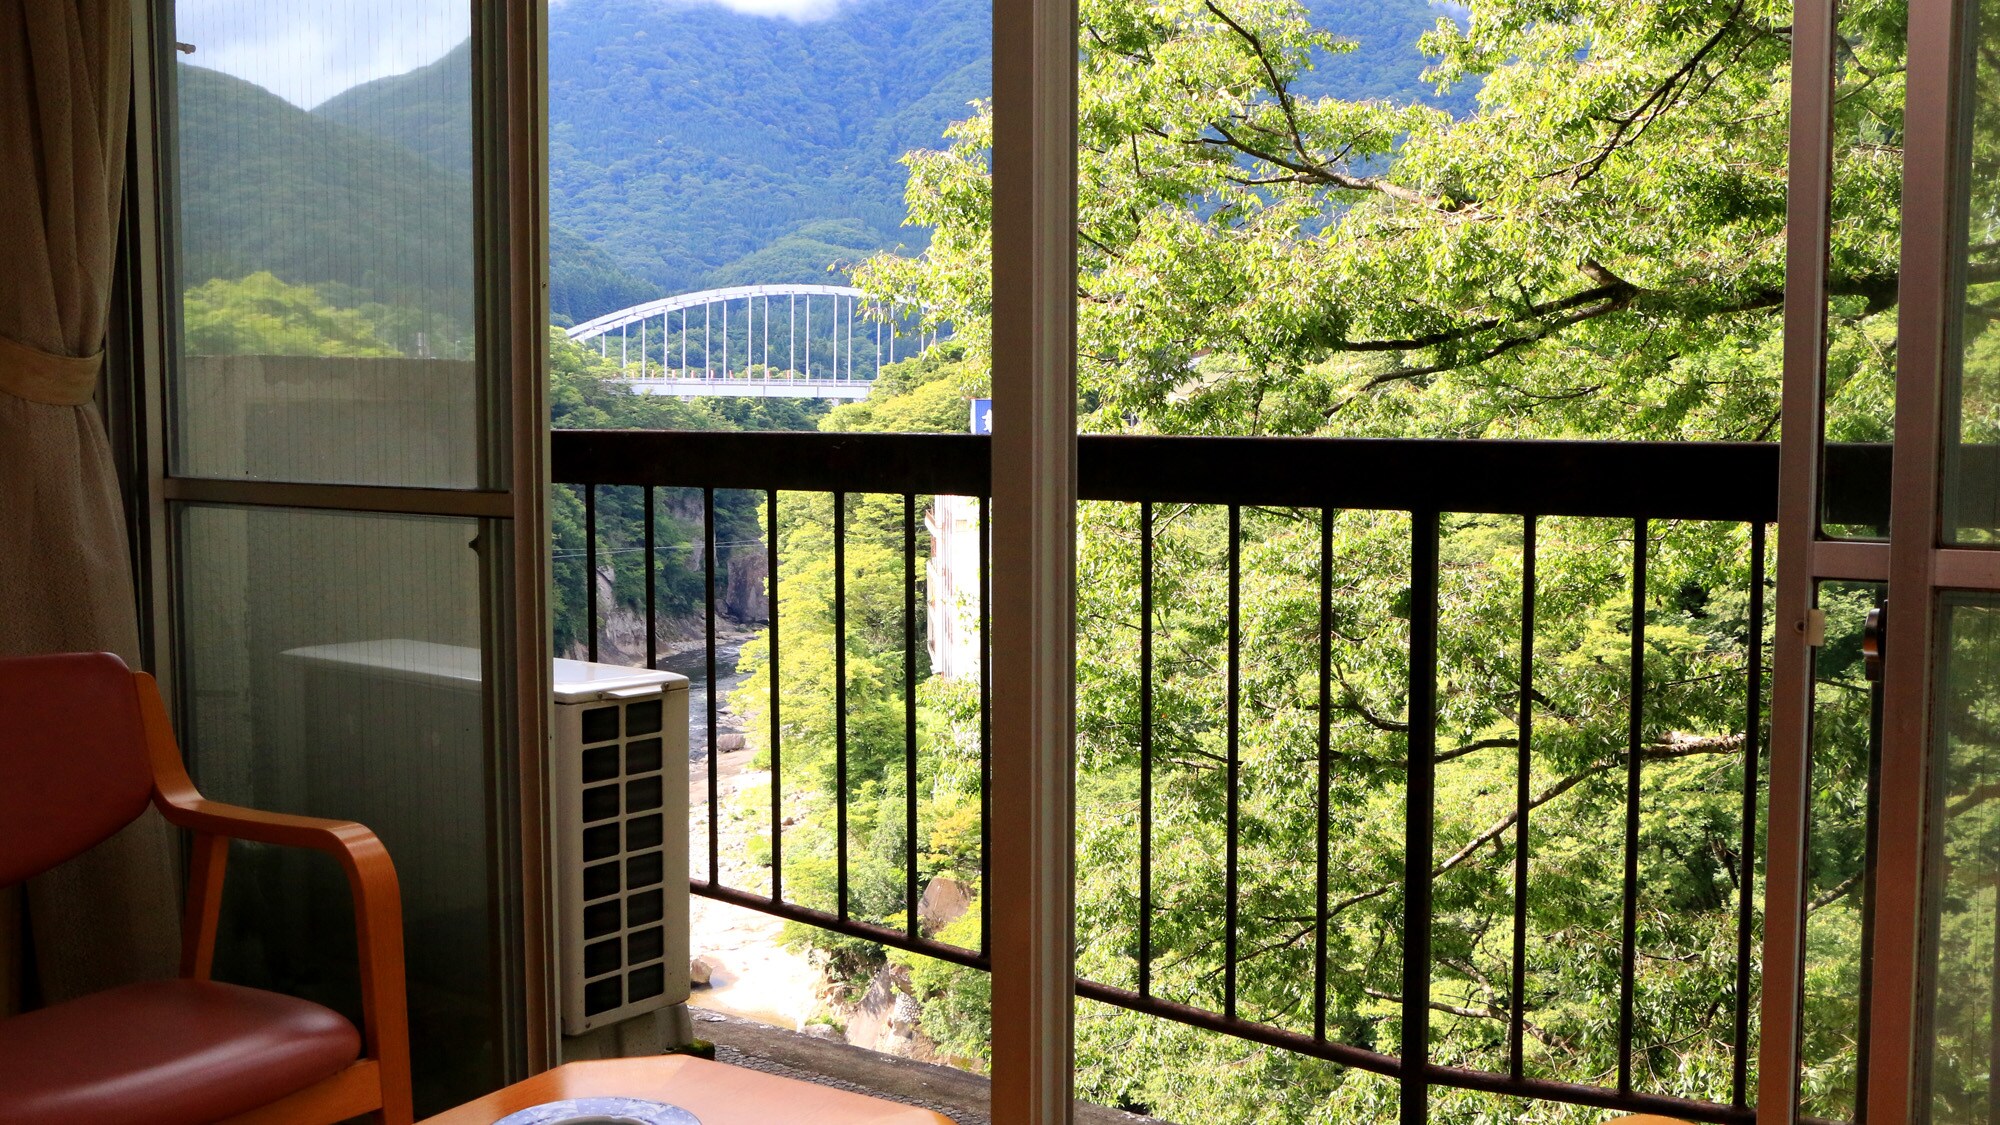 Room ◆ A room facing a mountain stream with a beautiful view below